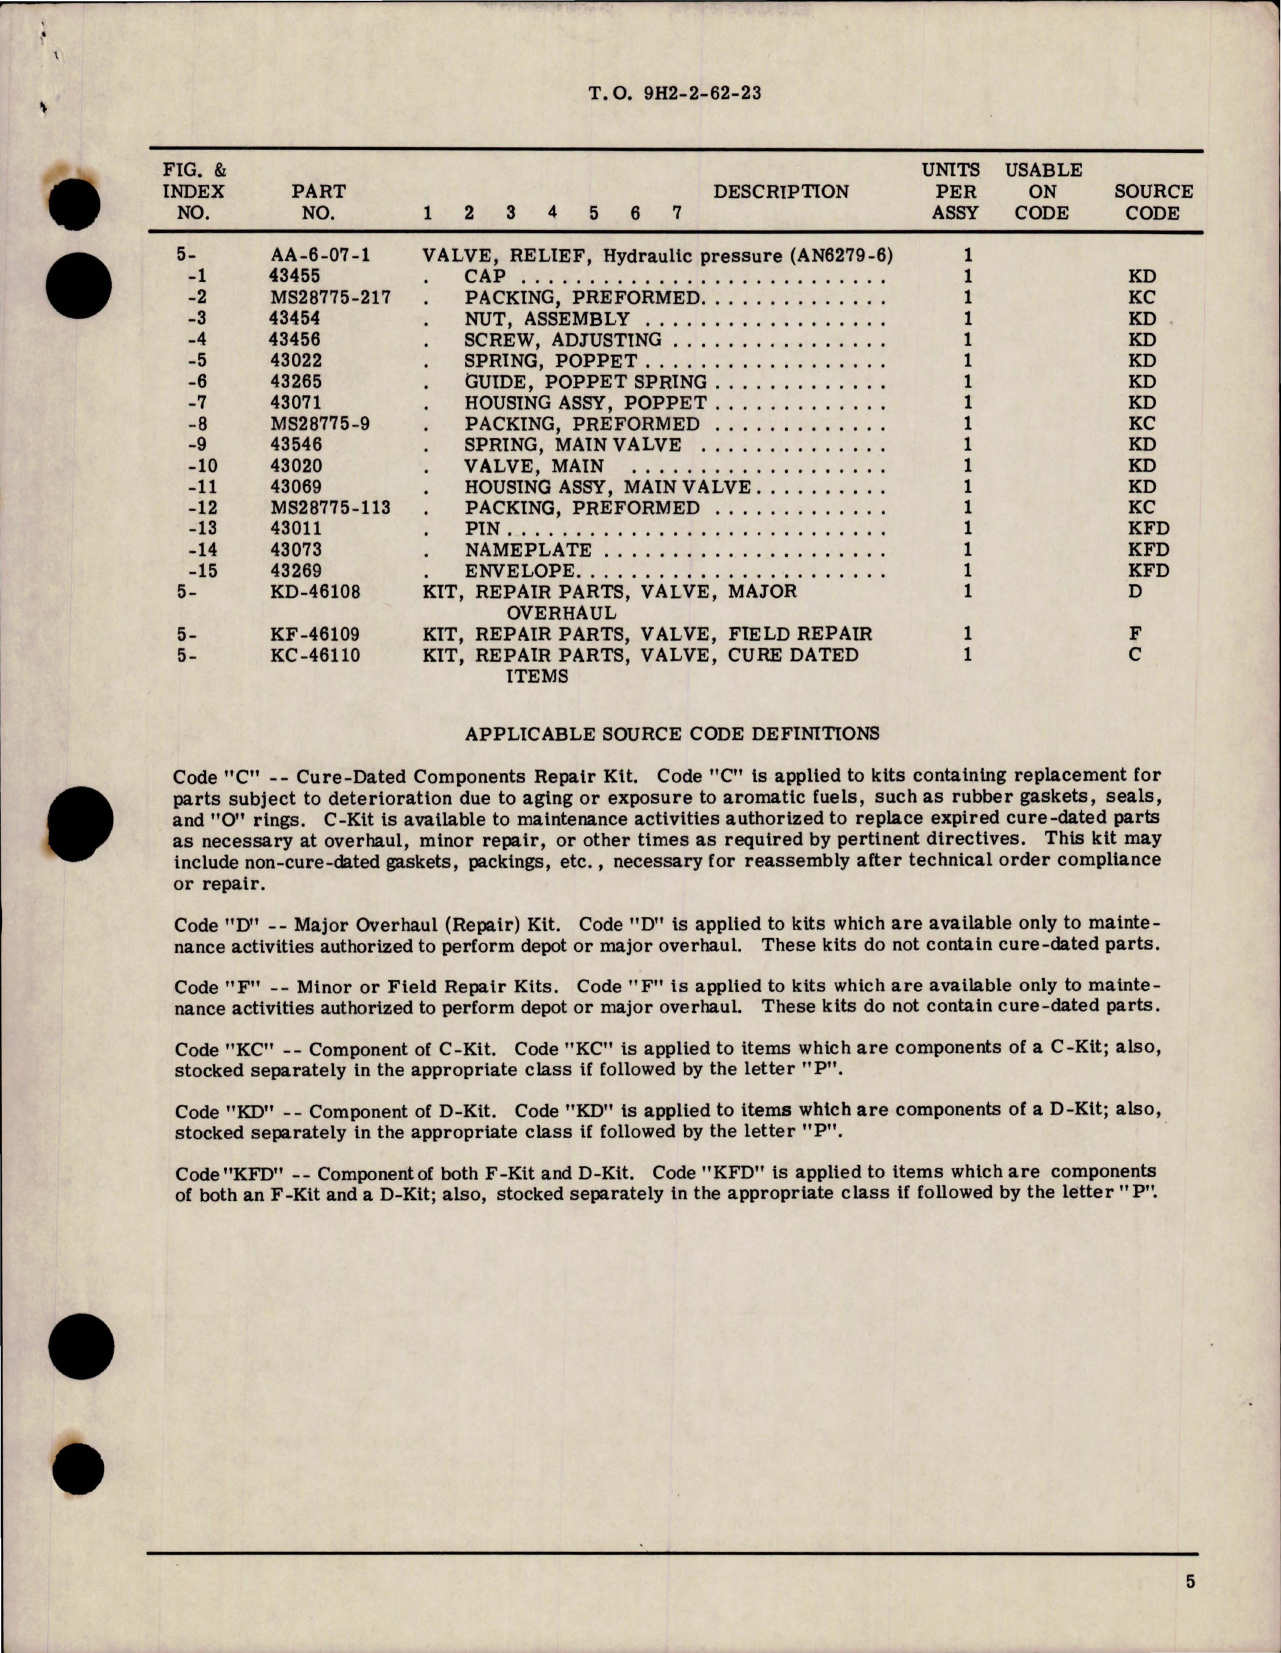 Sample page 5 from AirCorps Library document: Overhaul with Parts Breakdown for Hydraulic Pressure Relief Valve - Part AA-6-07-1